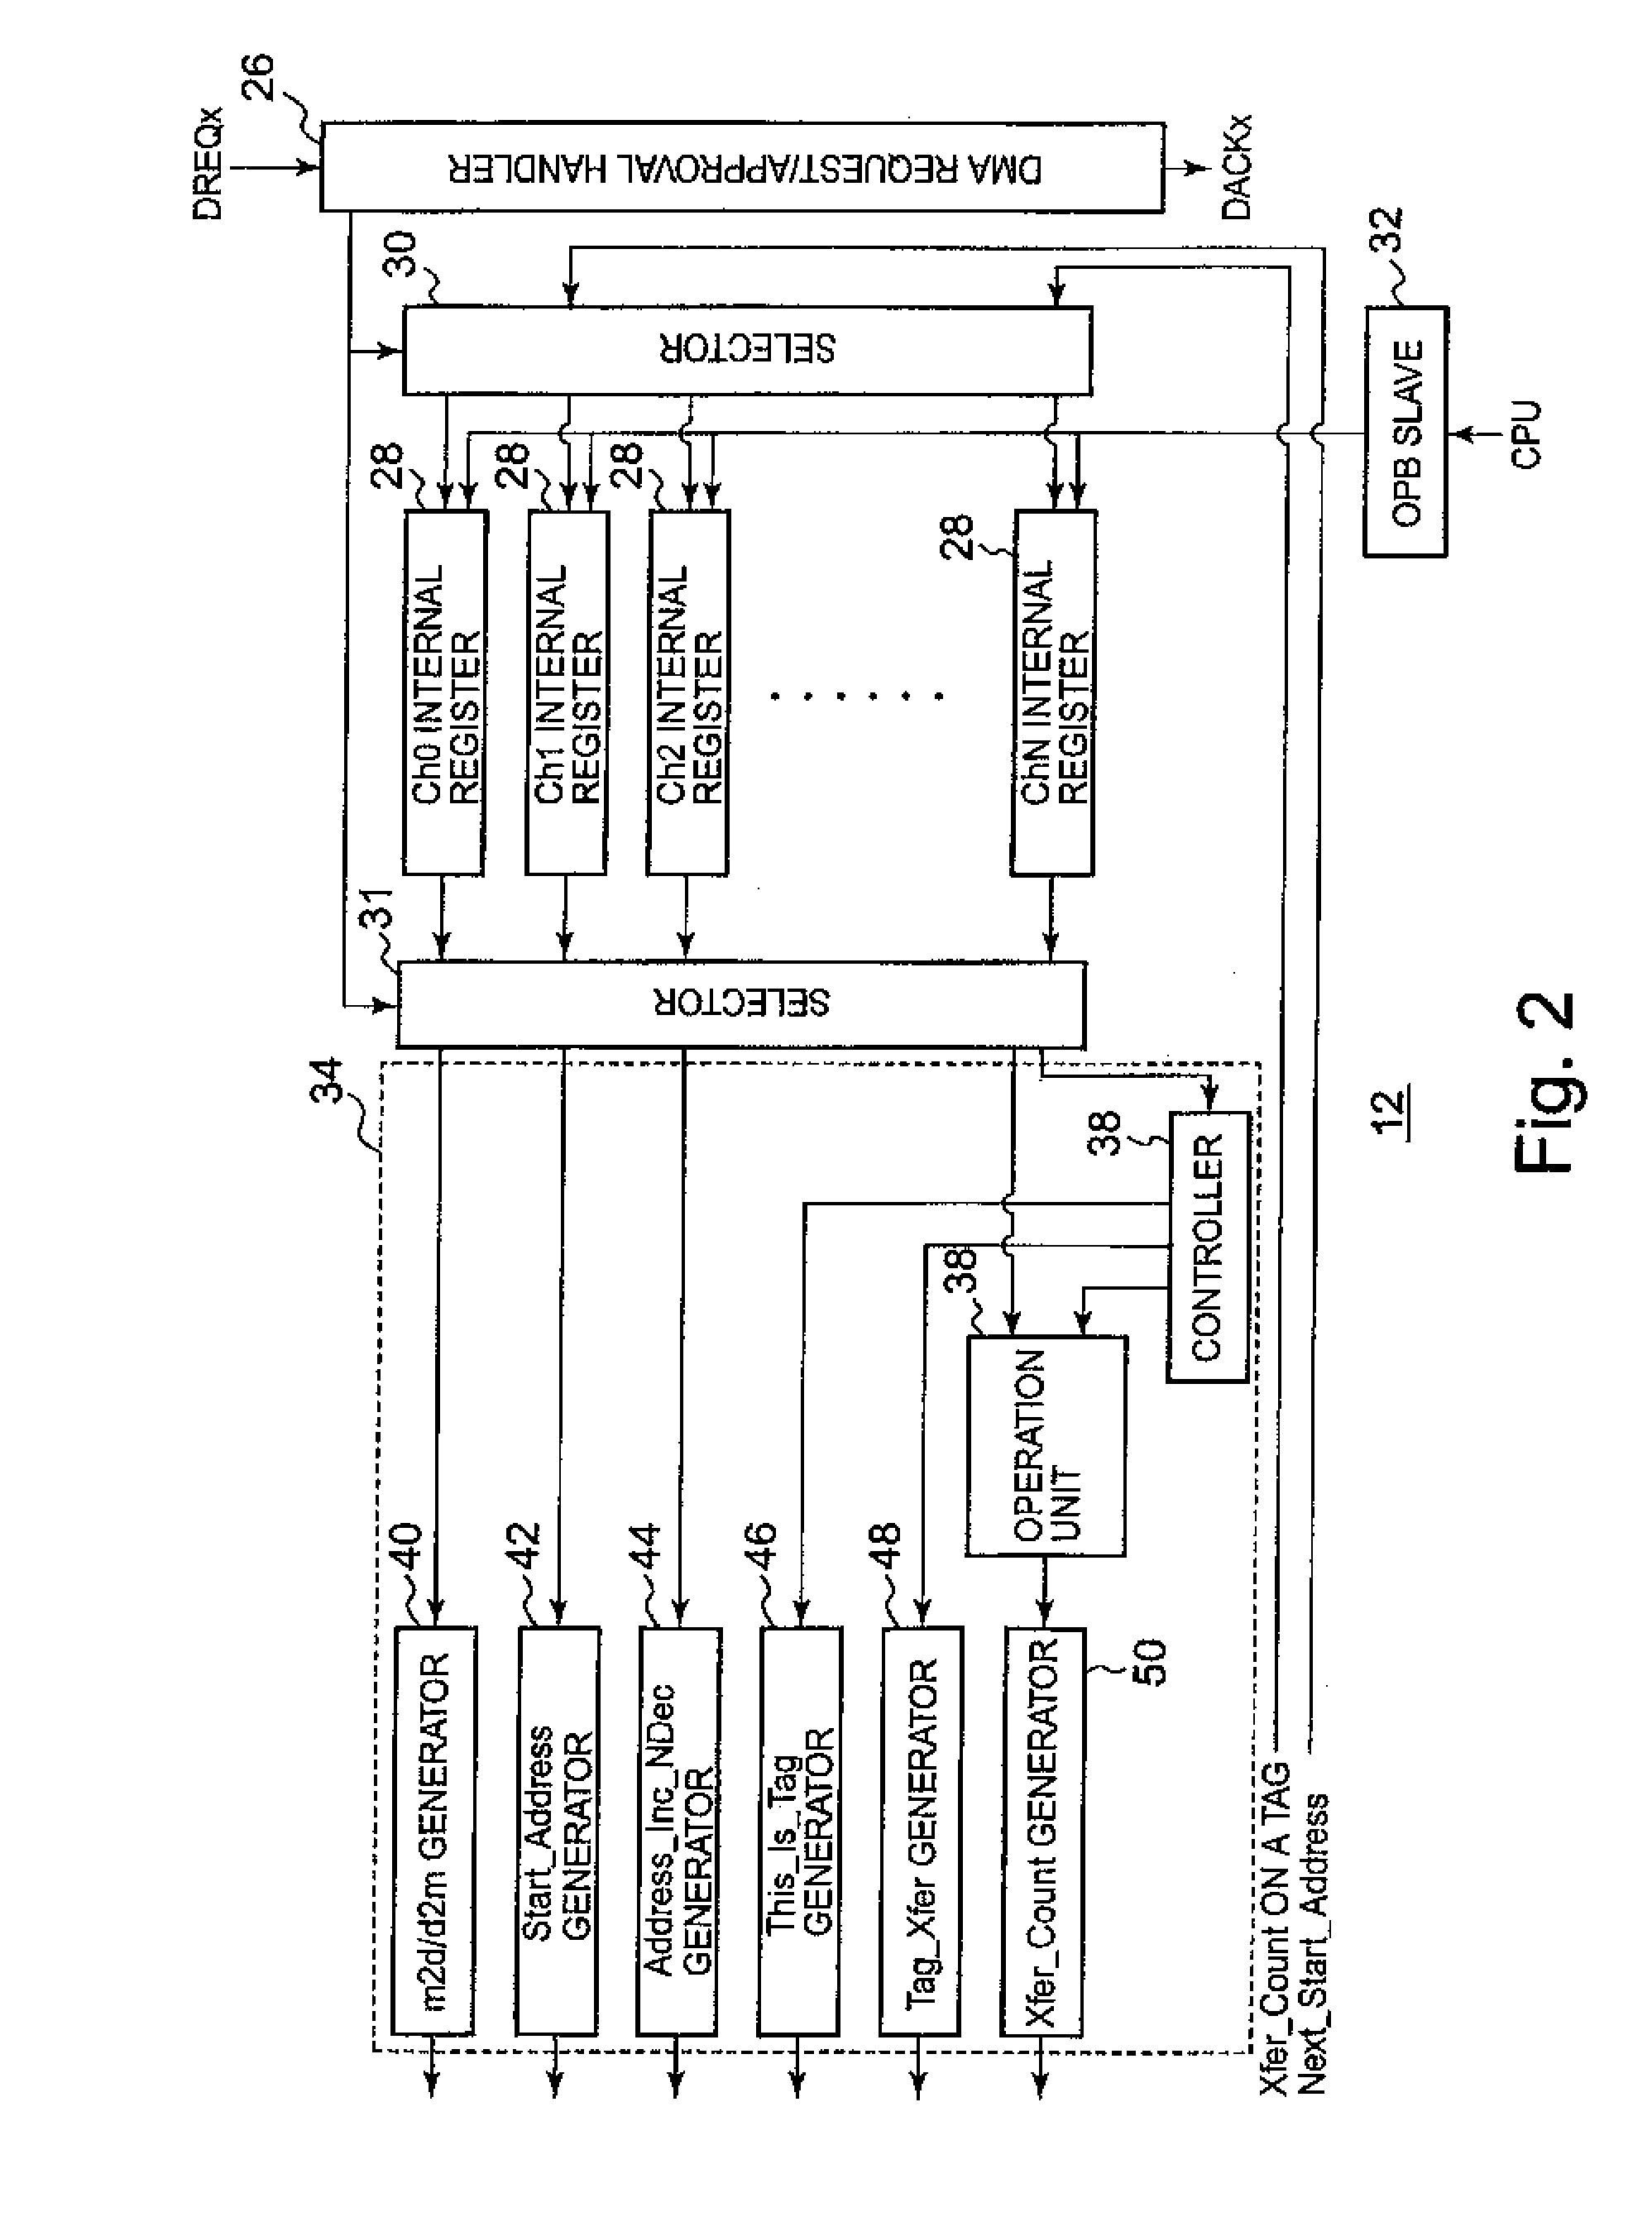 Multi mode DMA controller with transfer packet preprocessor